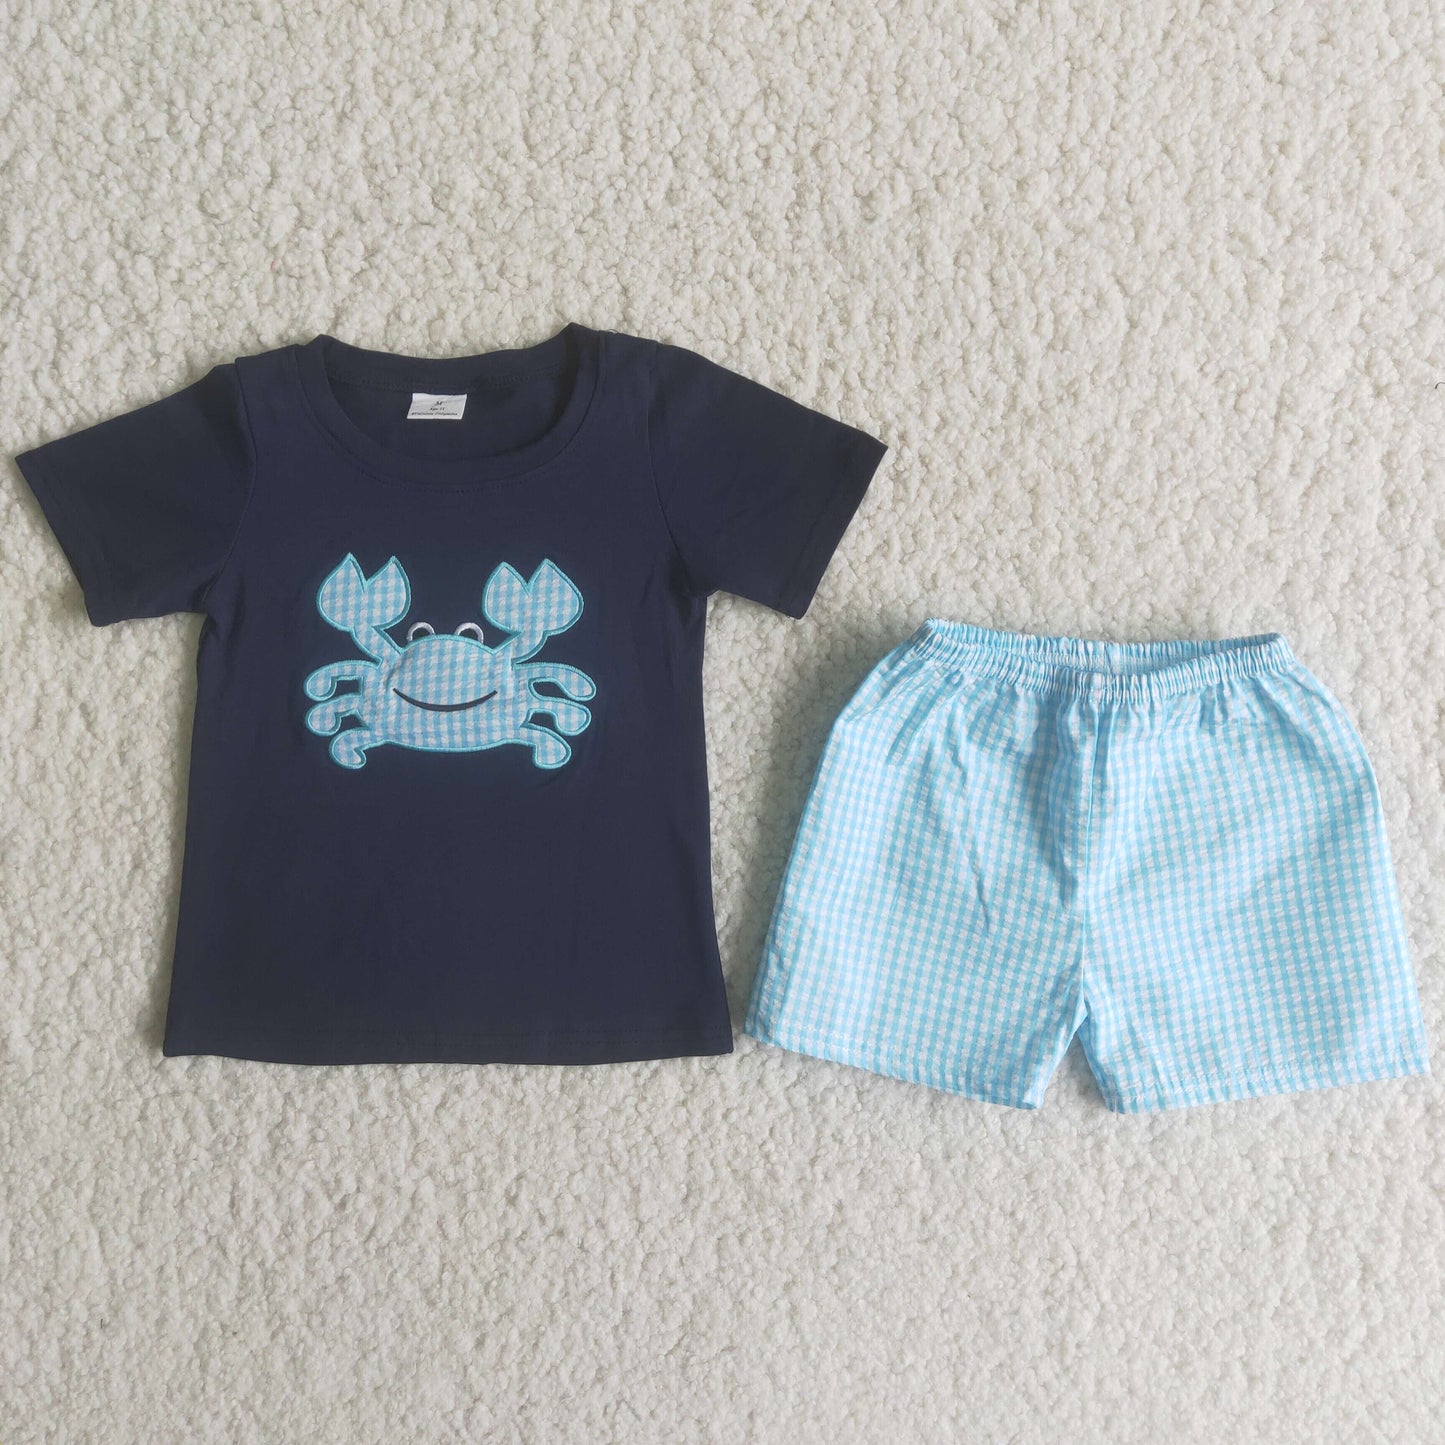 Boy Crab Embroidery Plaid Outfit: 4T